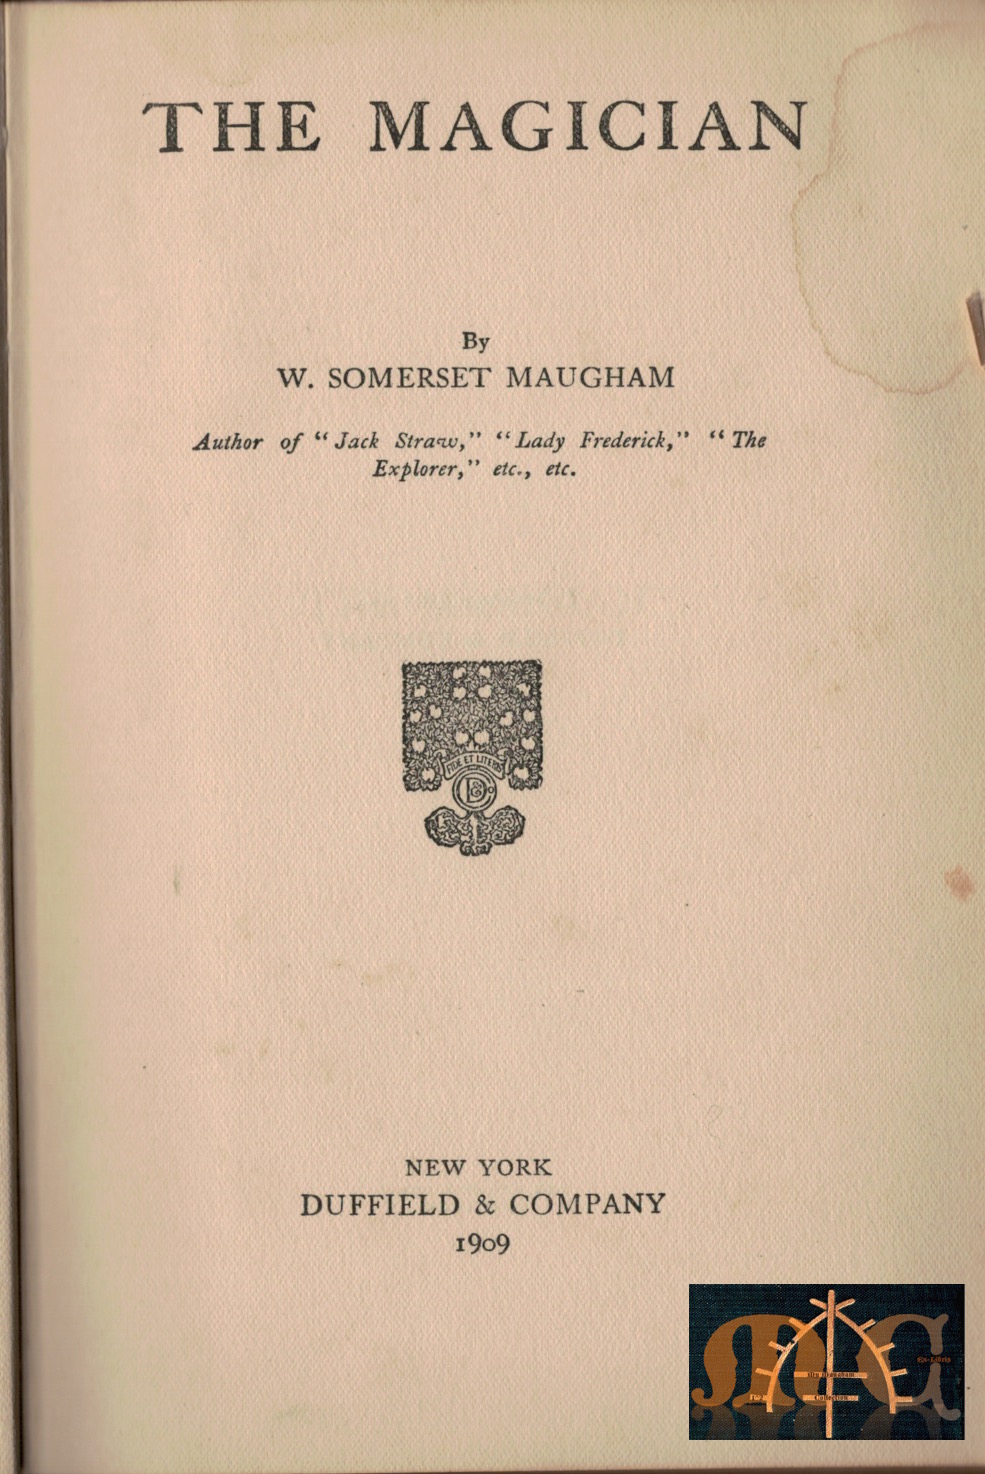 title page of The Magician 1909